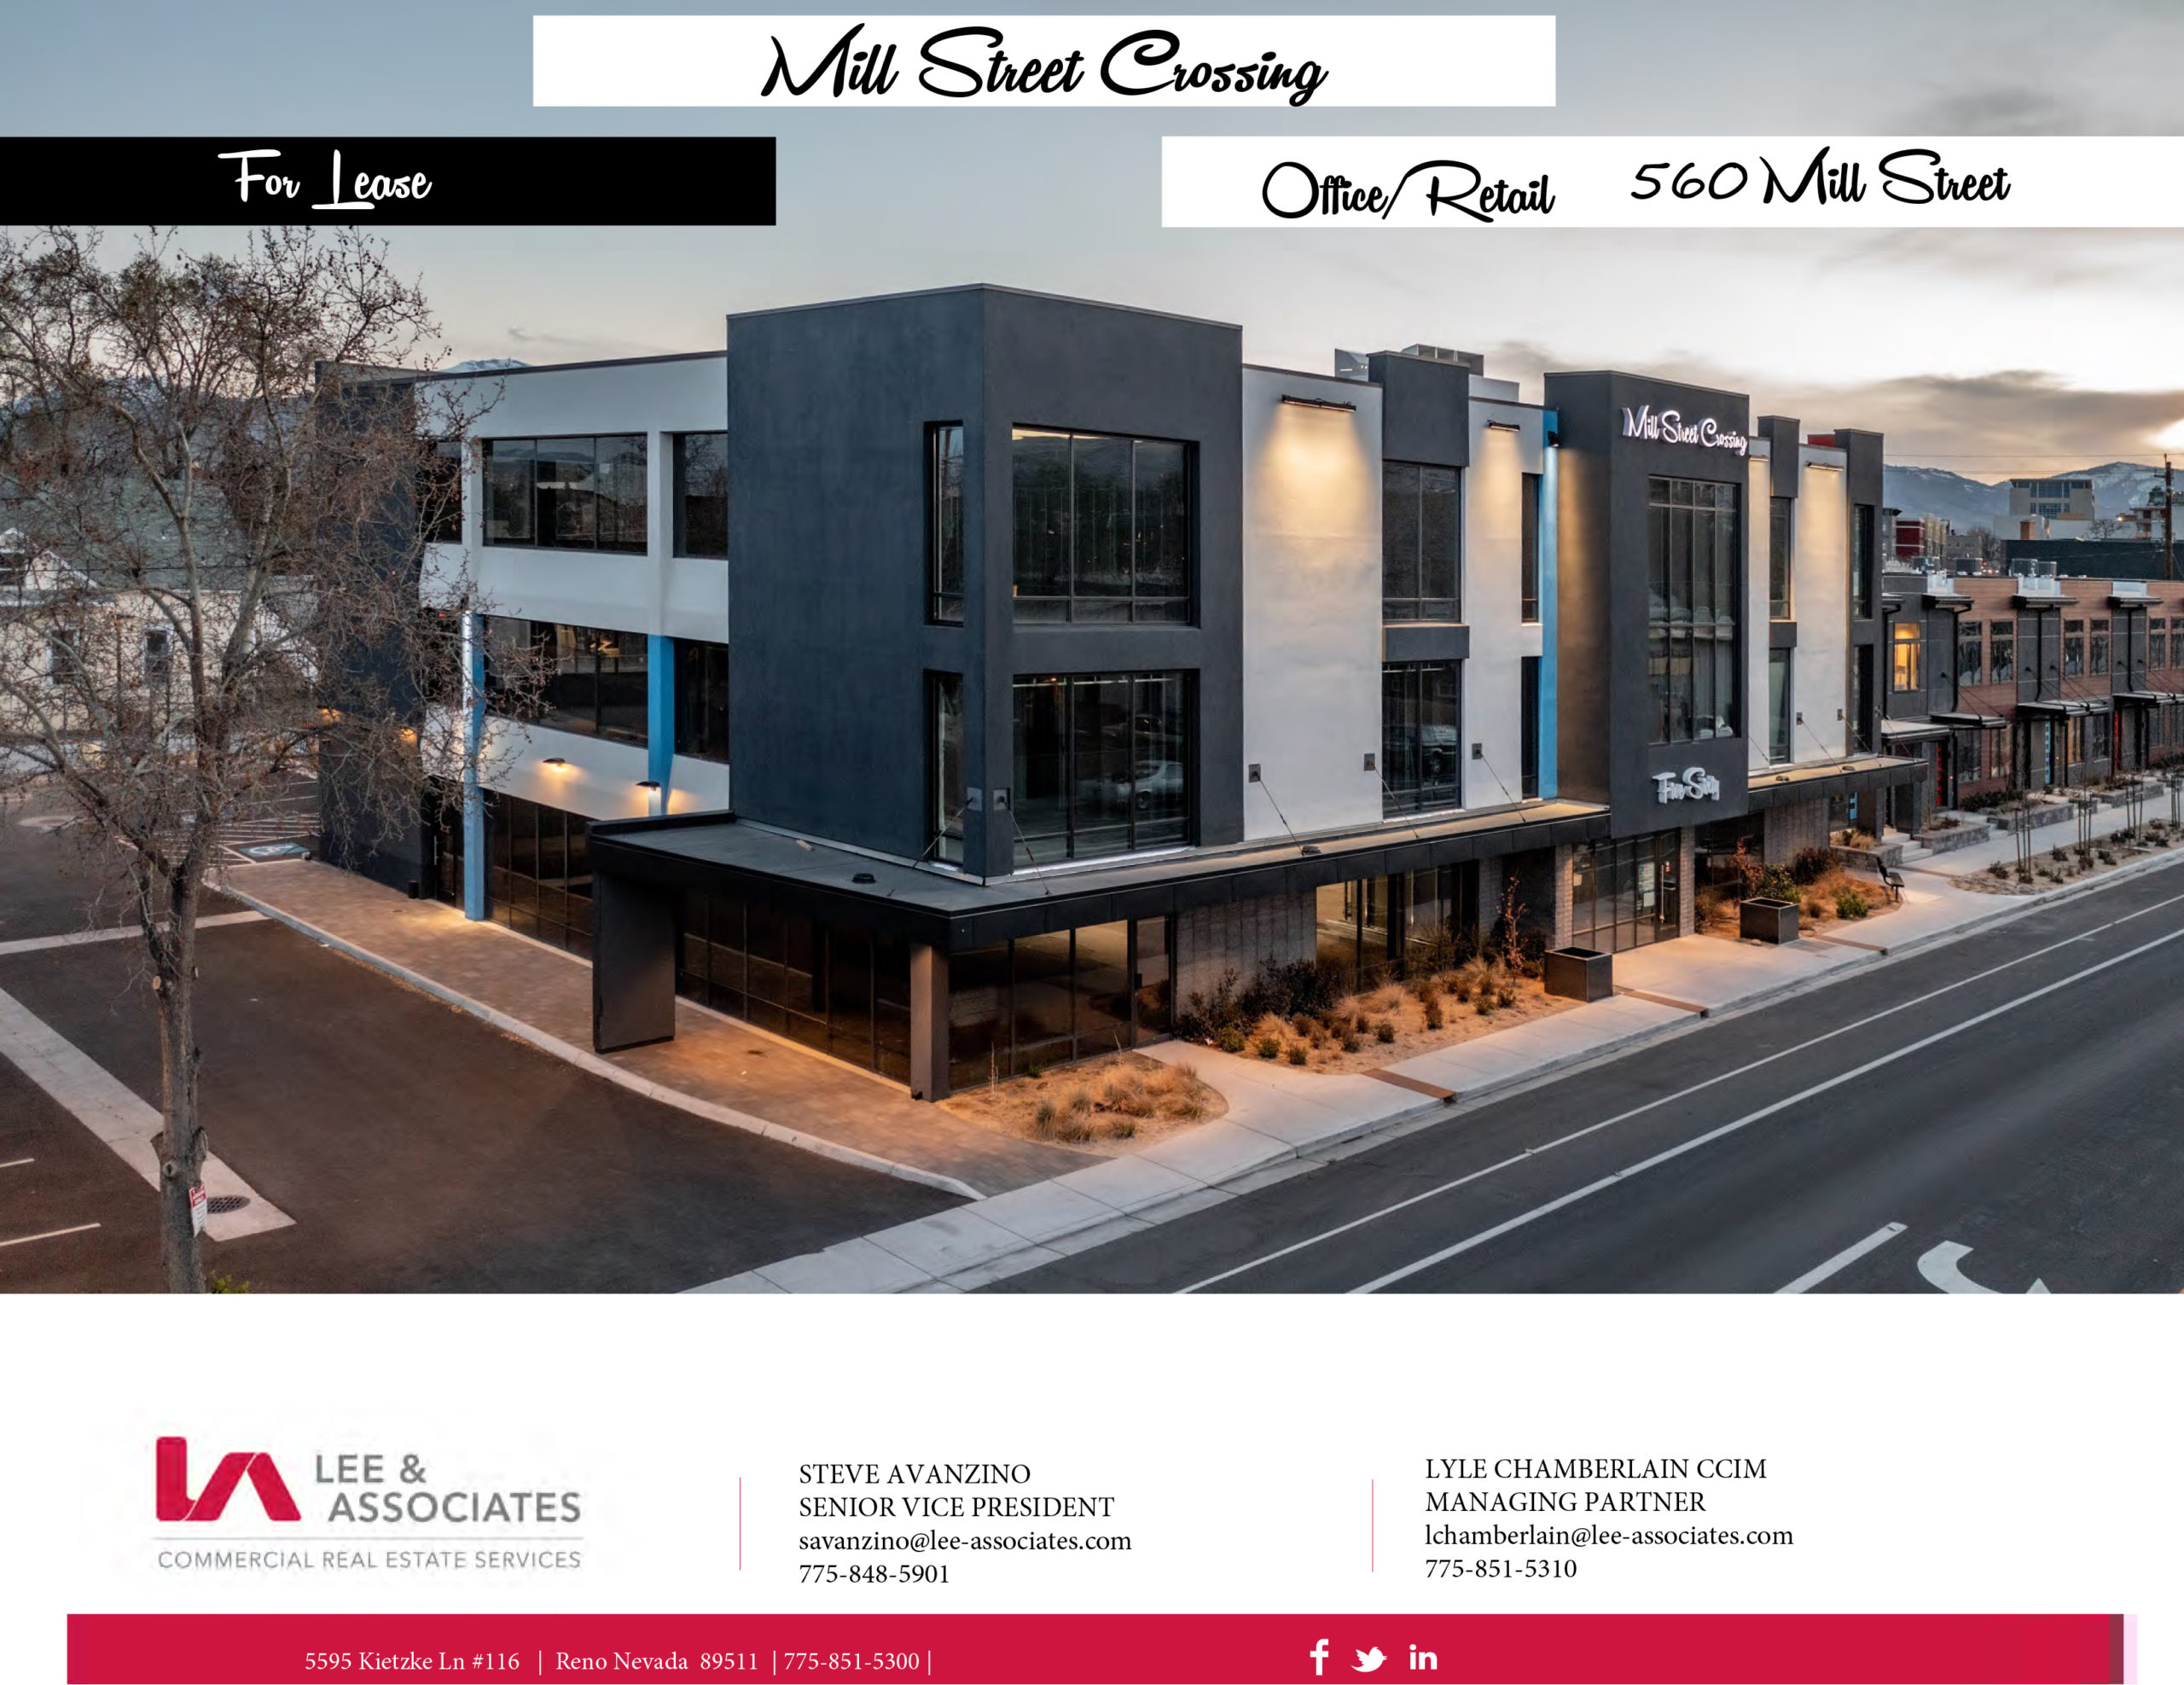 FOR LEASE - 560 Mill Street - Office/Retail